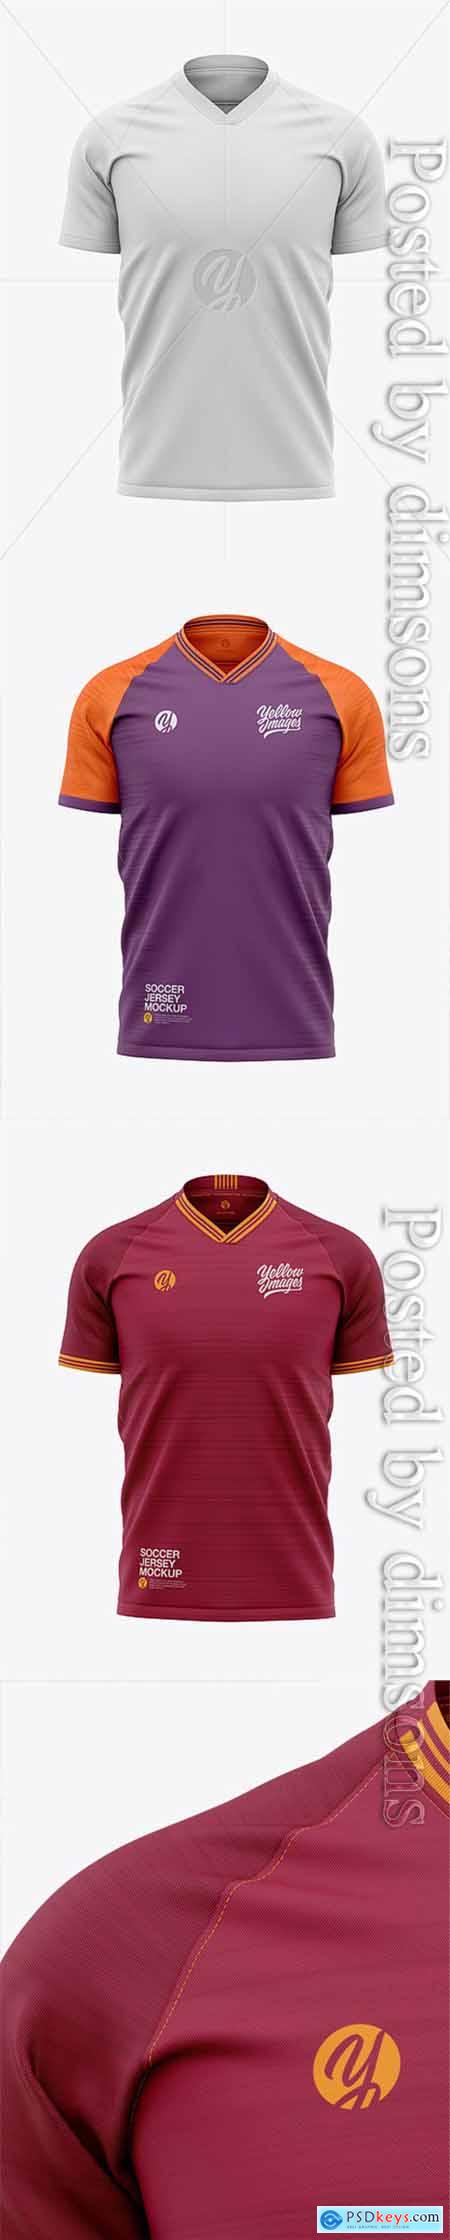 Download Apparel Free Download Photoshop Vector Stock Image Via Torrent Zippyshare From Psdkeys Com Page 37 Chan 60353361 Rssing Com PSD Mockup Templates